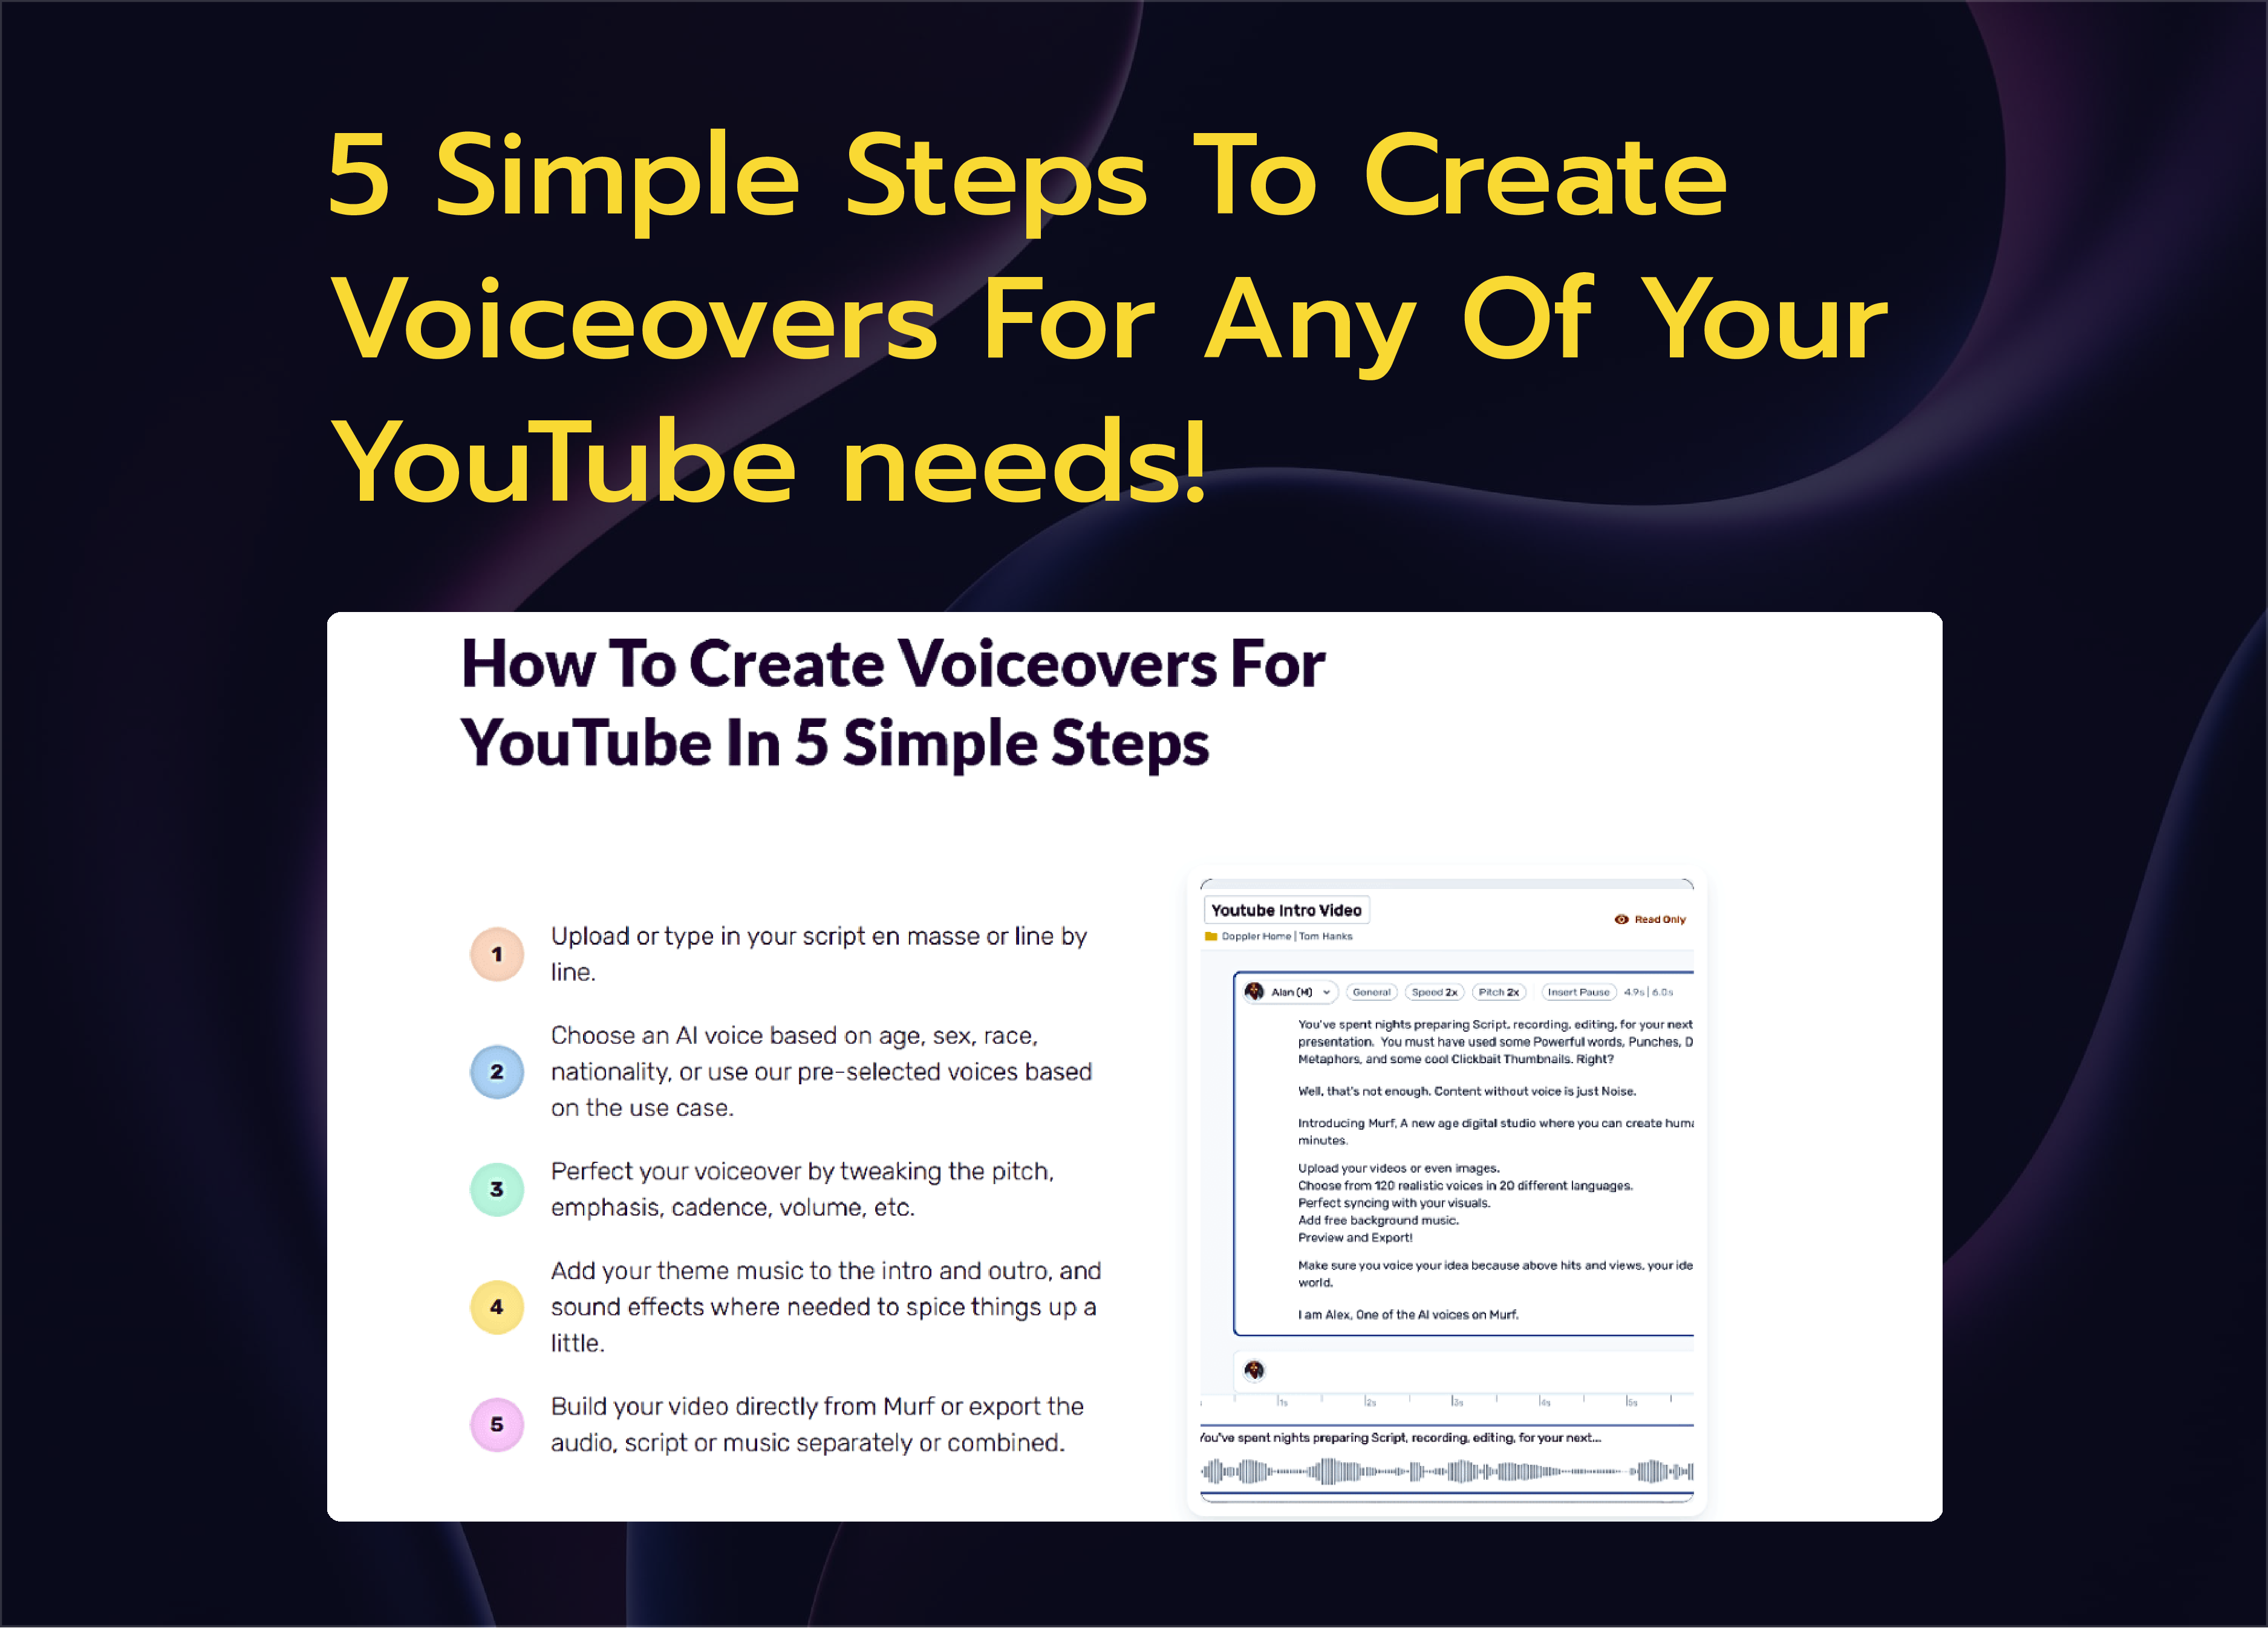 Infographic outlining five simple steps to create voiceovers for YouTube using Murf AI.